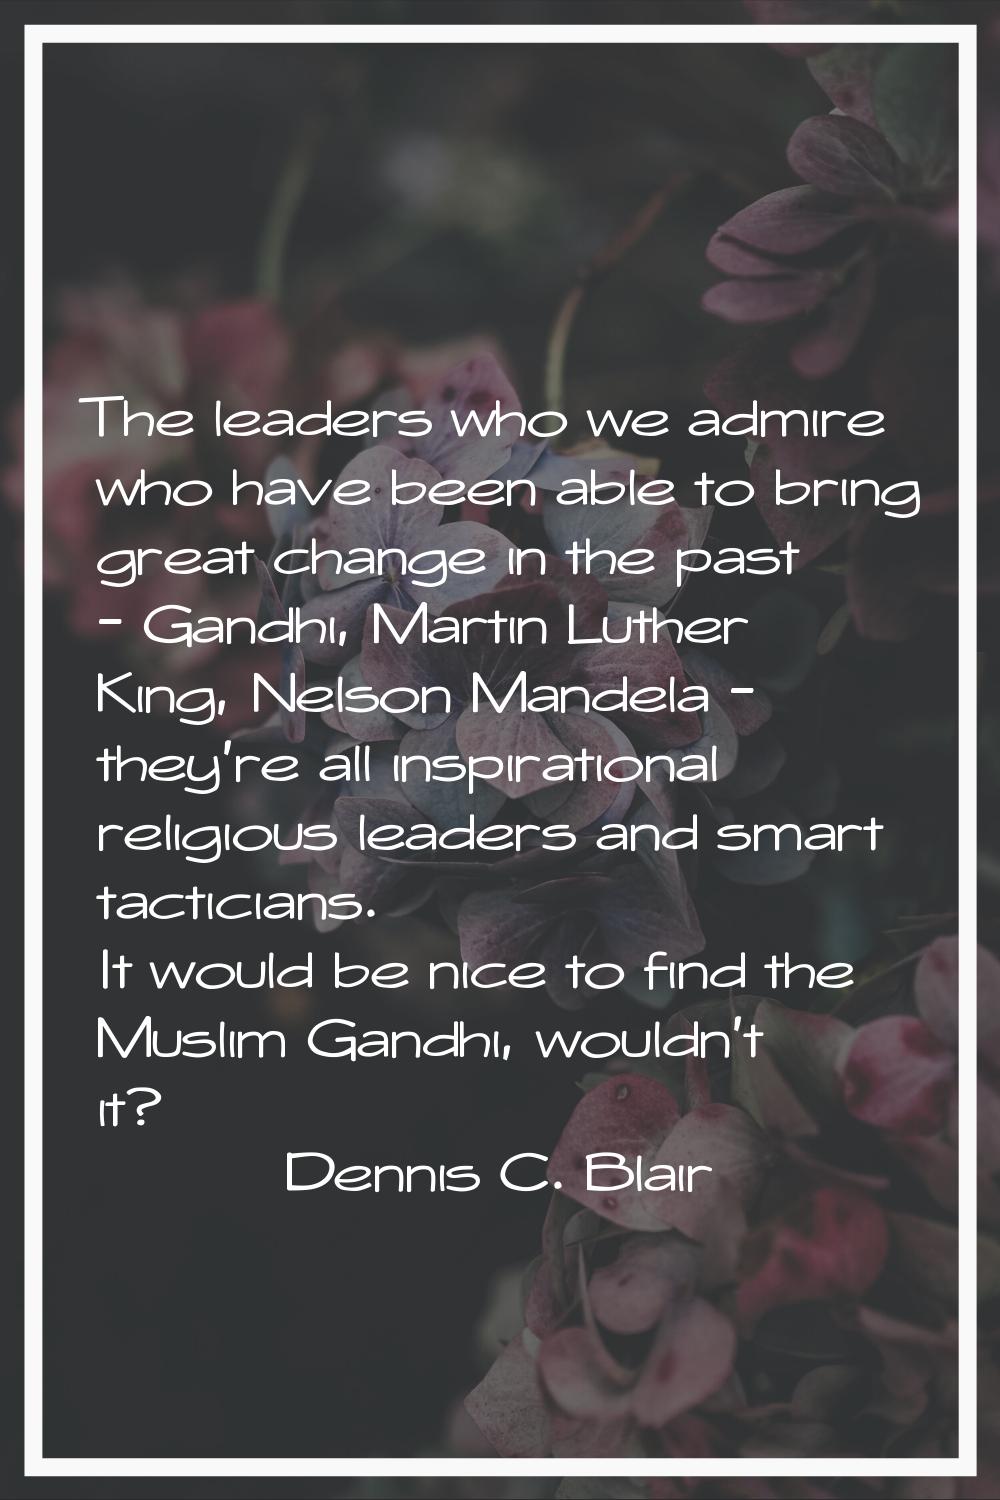 The leaders who we admire who have been able to bring great change in the past - Gandhi, Martin Lut